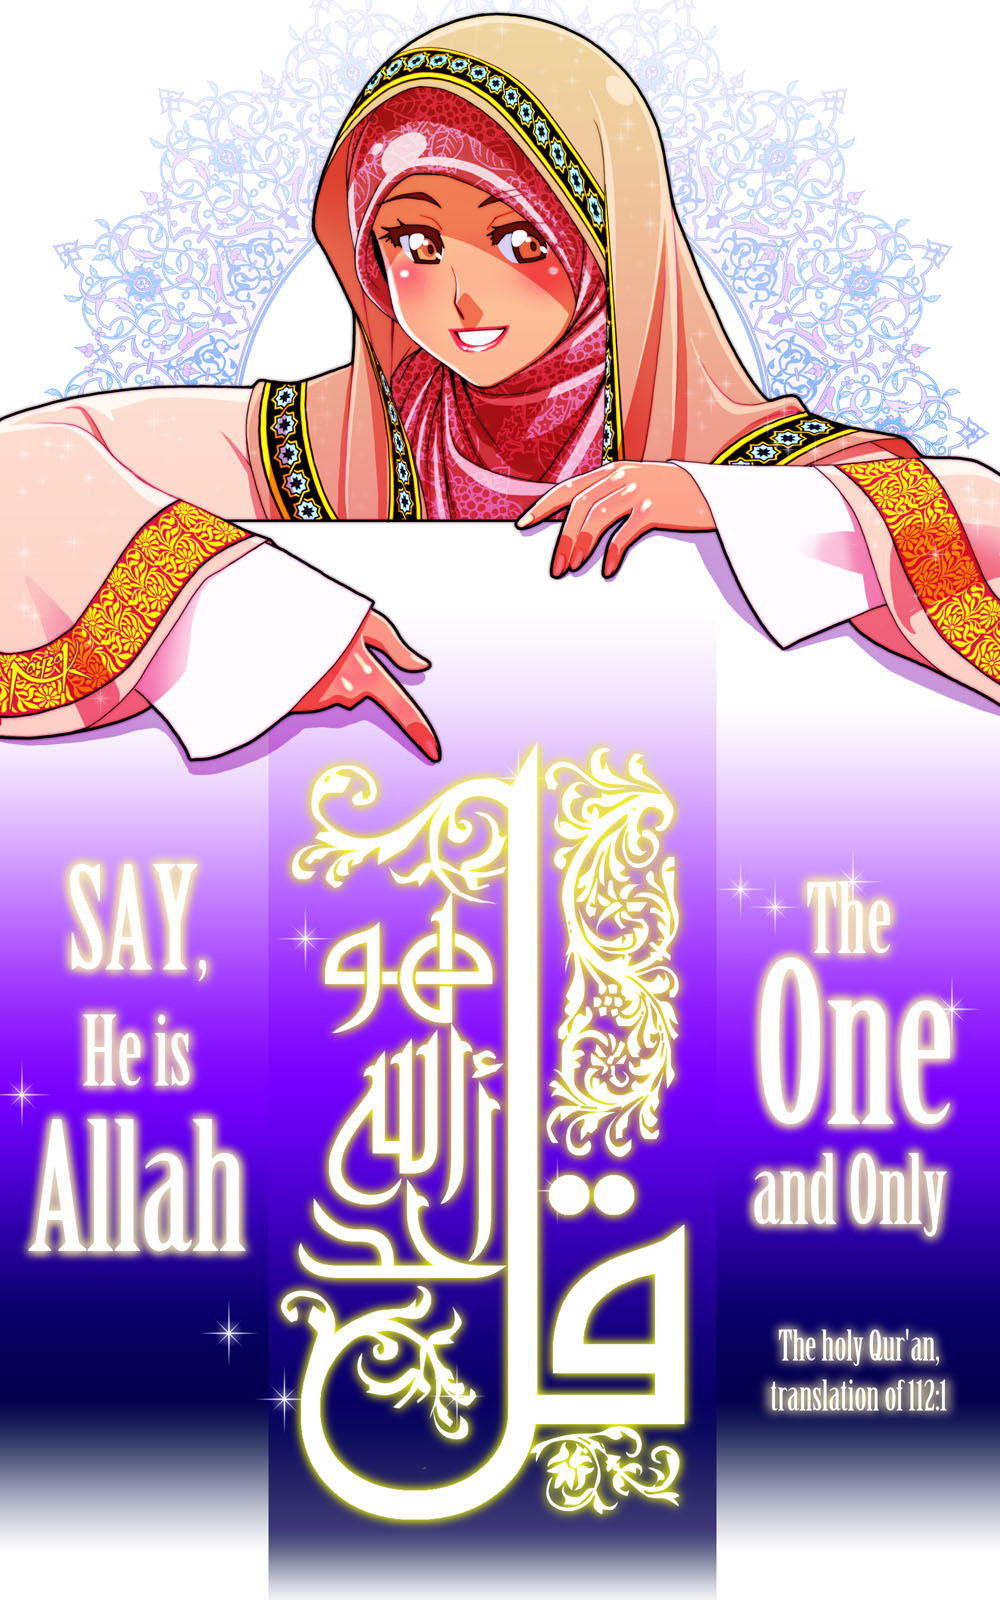 Who is Allah  by Nayzak on DeviantArt